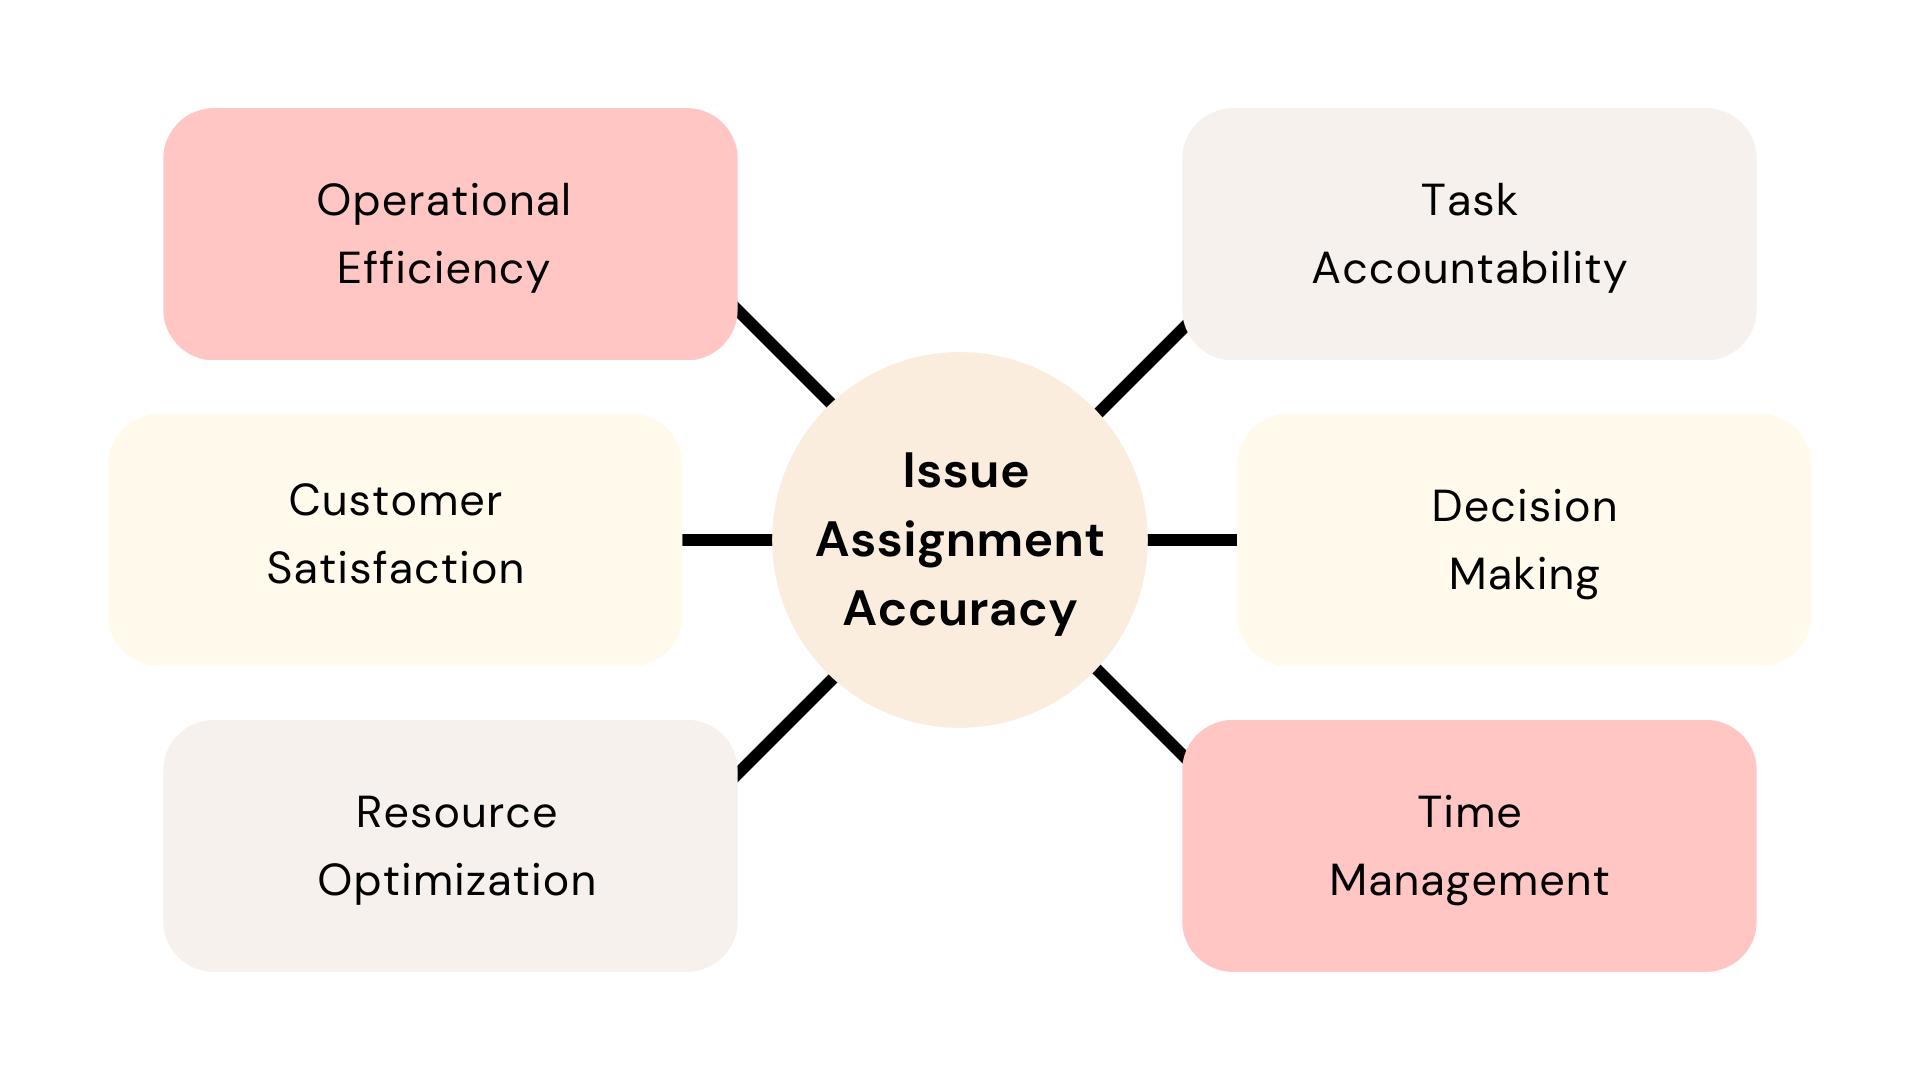 Issue Assignment Accuracy